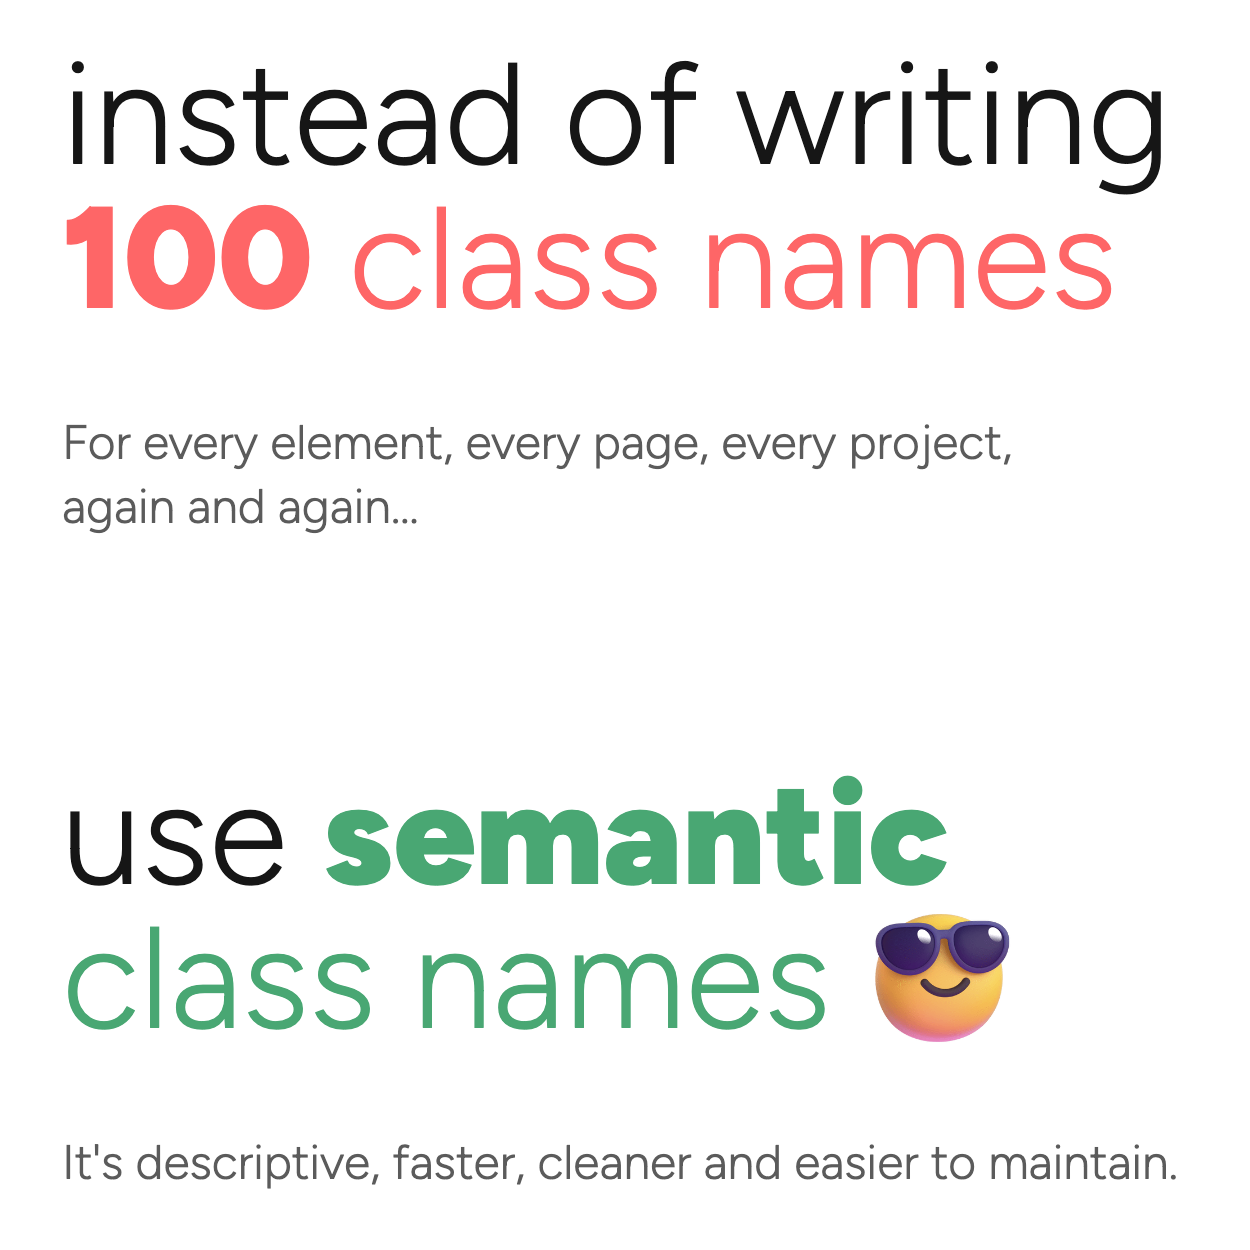 Instead of writing 100 class
names, for every element, every page, every project, again and again... use
semantic class names